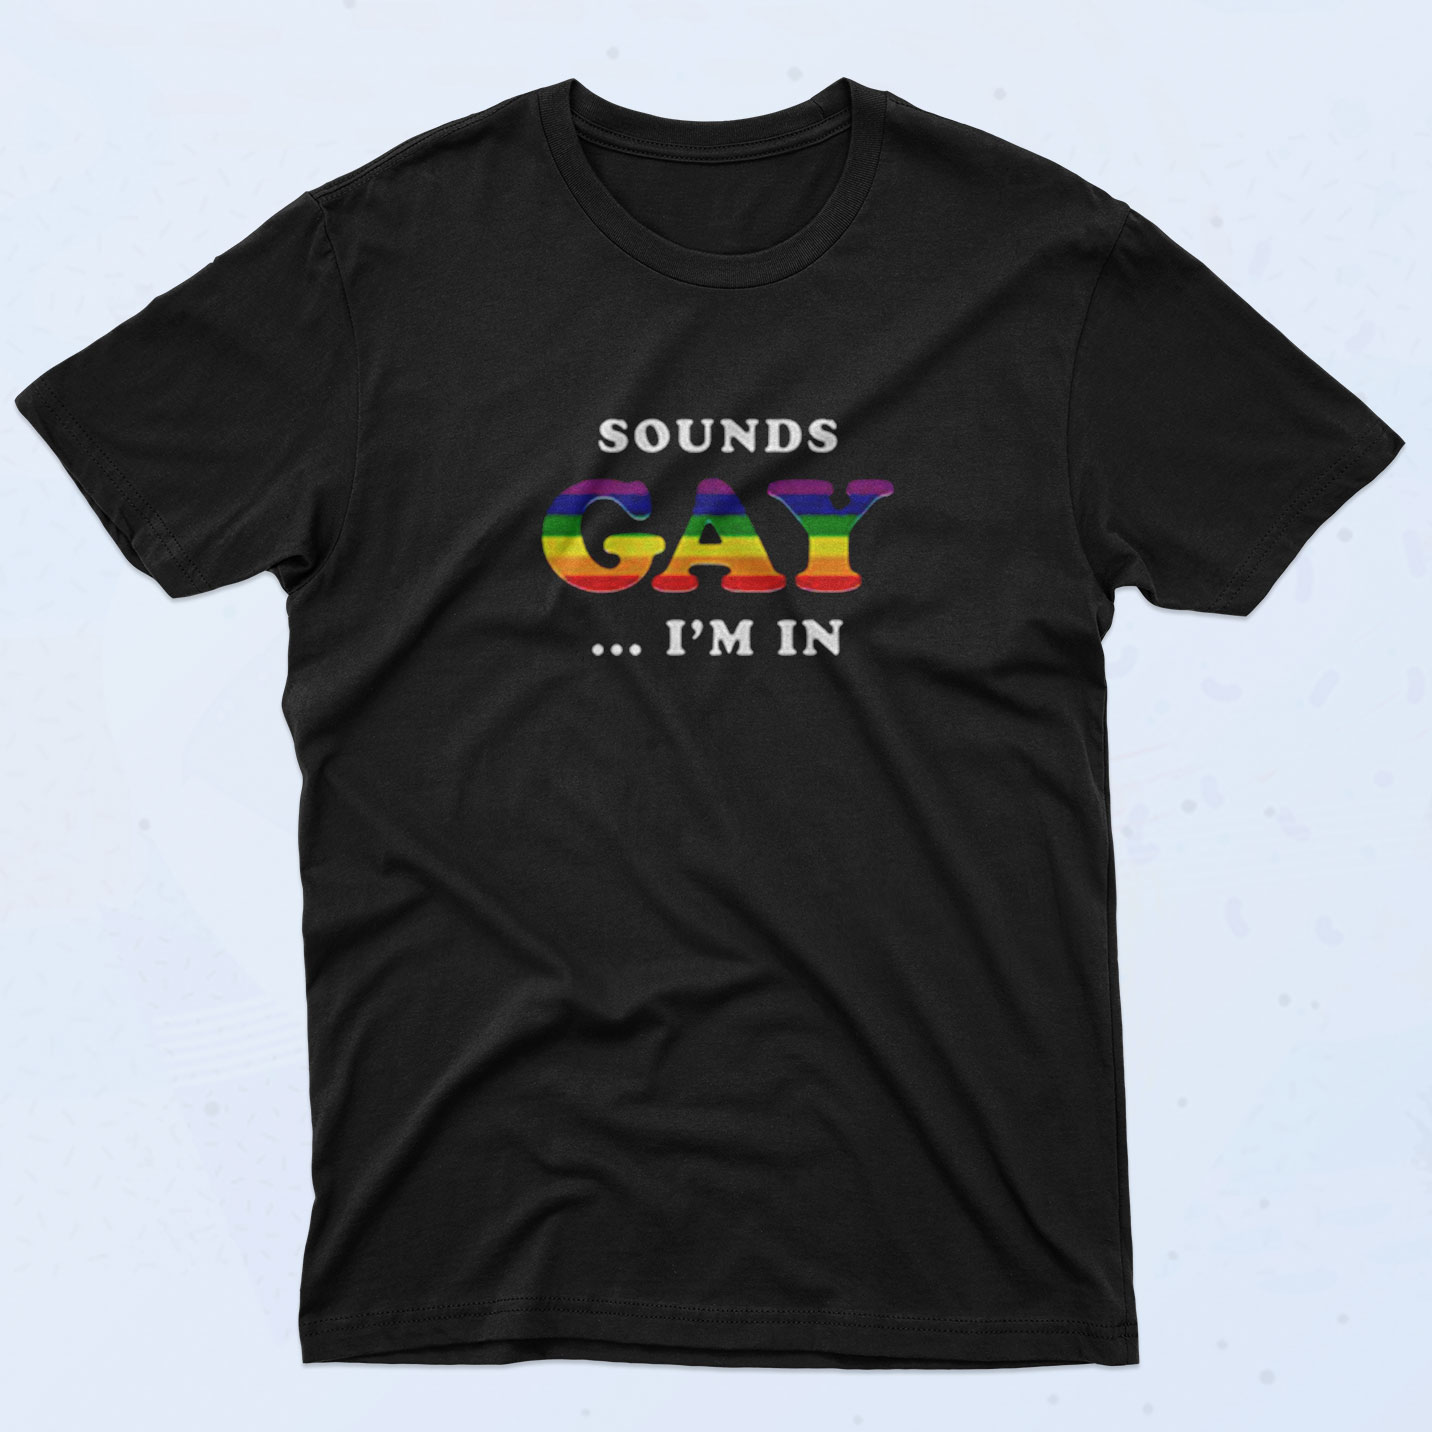 Sounds Gay I'm In 90s T Shirt Style - 90sclothes.com